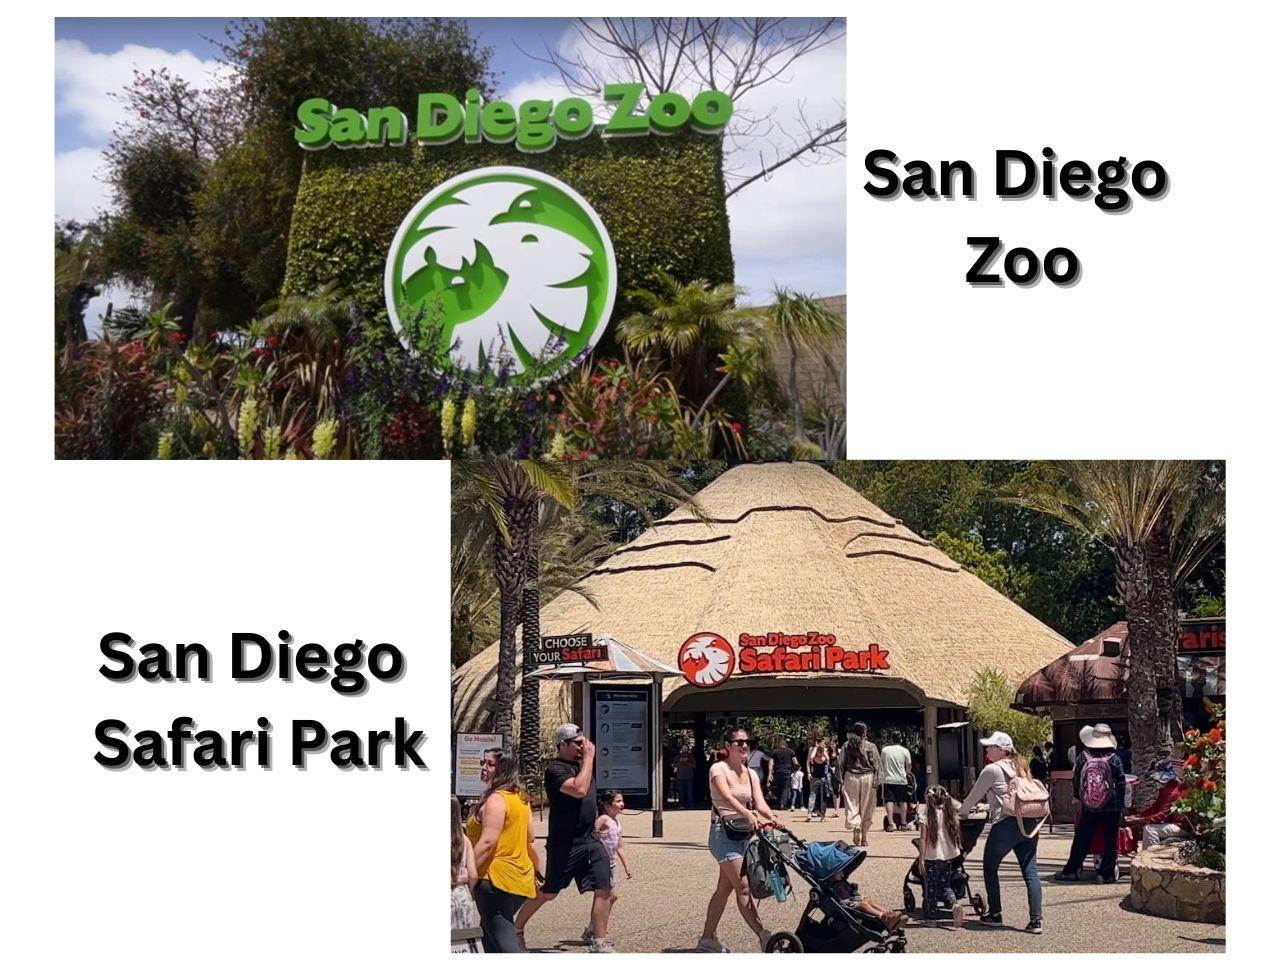 San Diego Zoo and Safari Park, California: Hours, Prices, and Animals